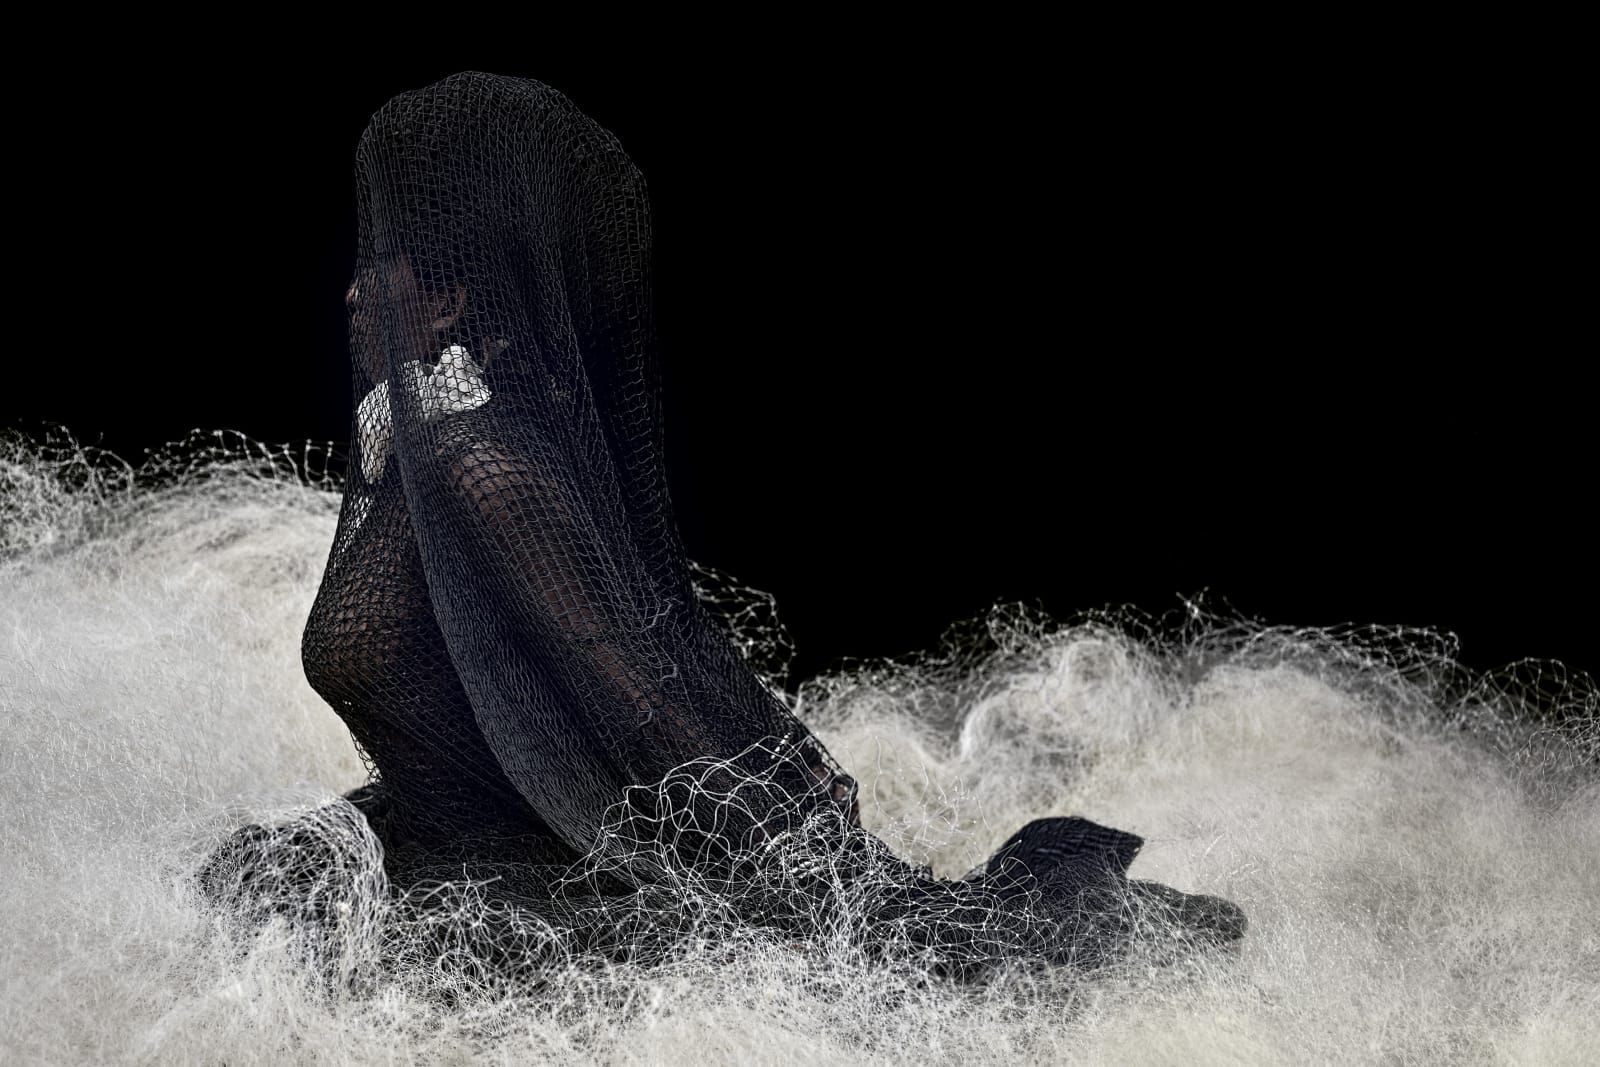 Ayana V. Jackson, Sighting in the Abyss III, 2019